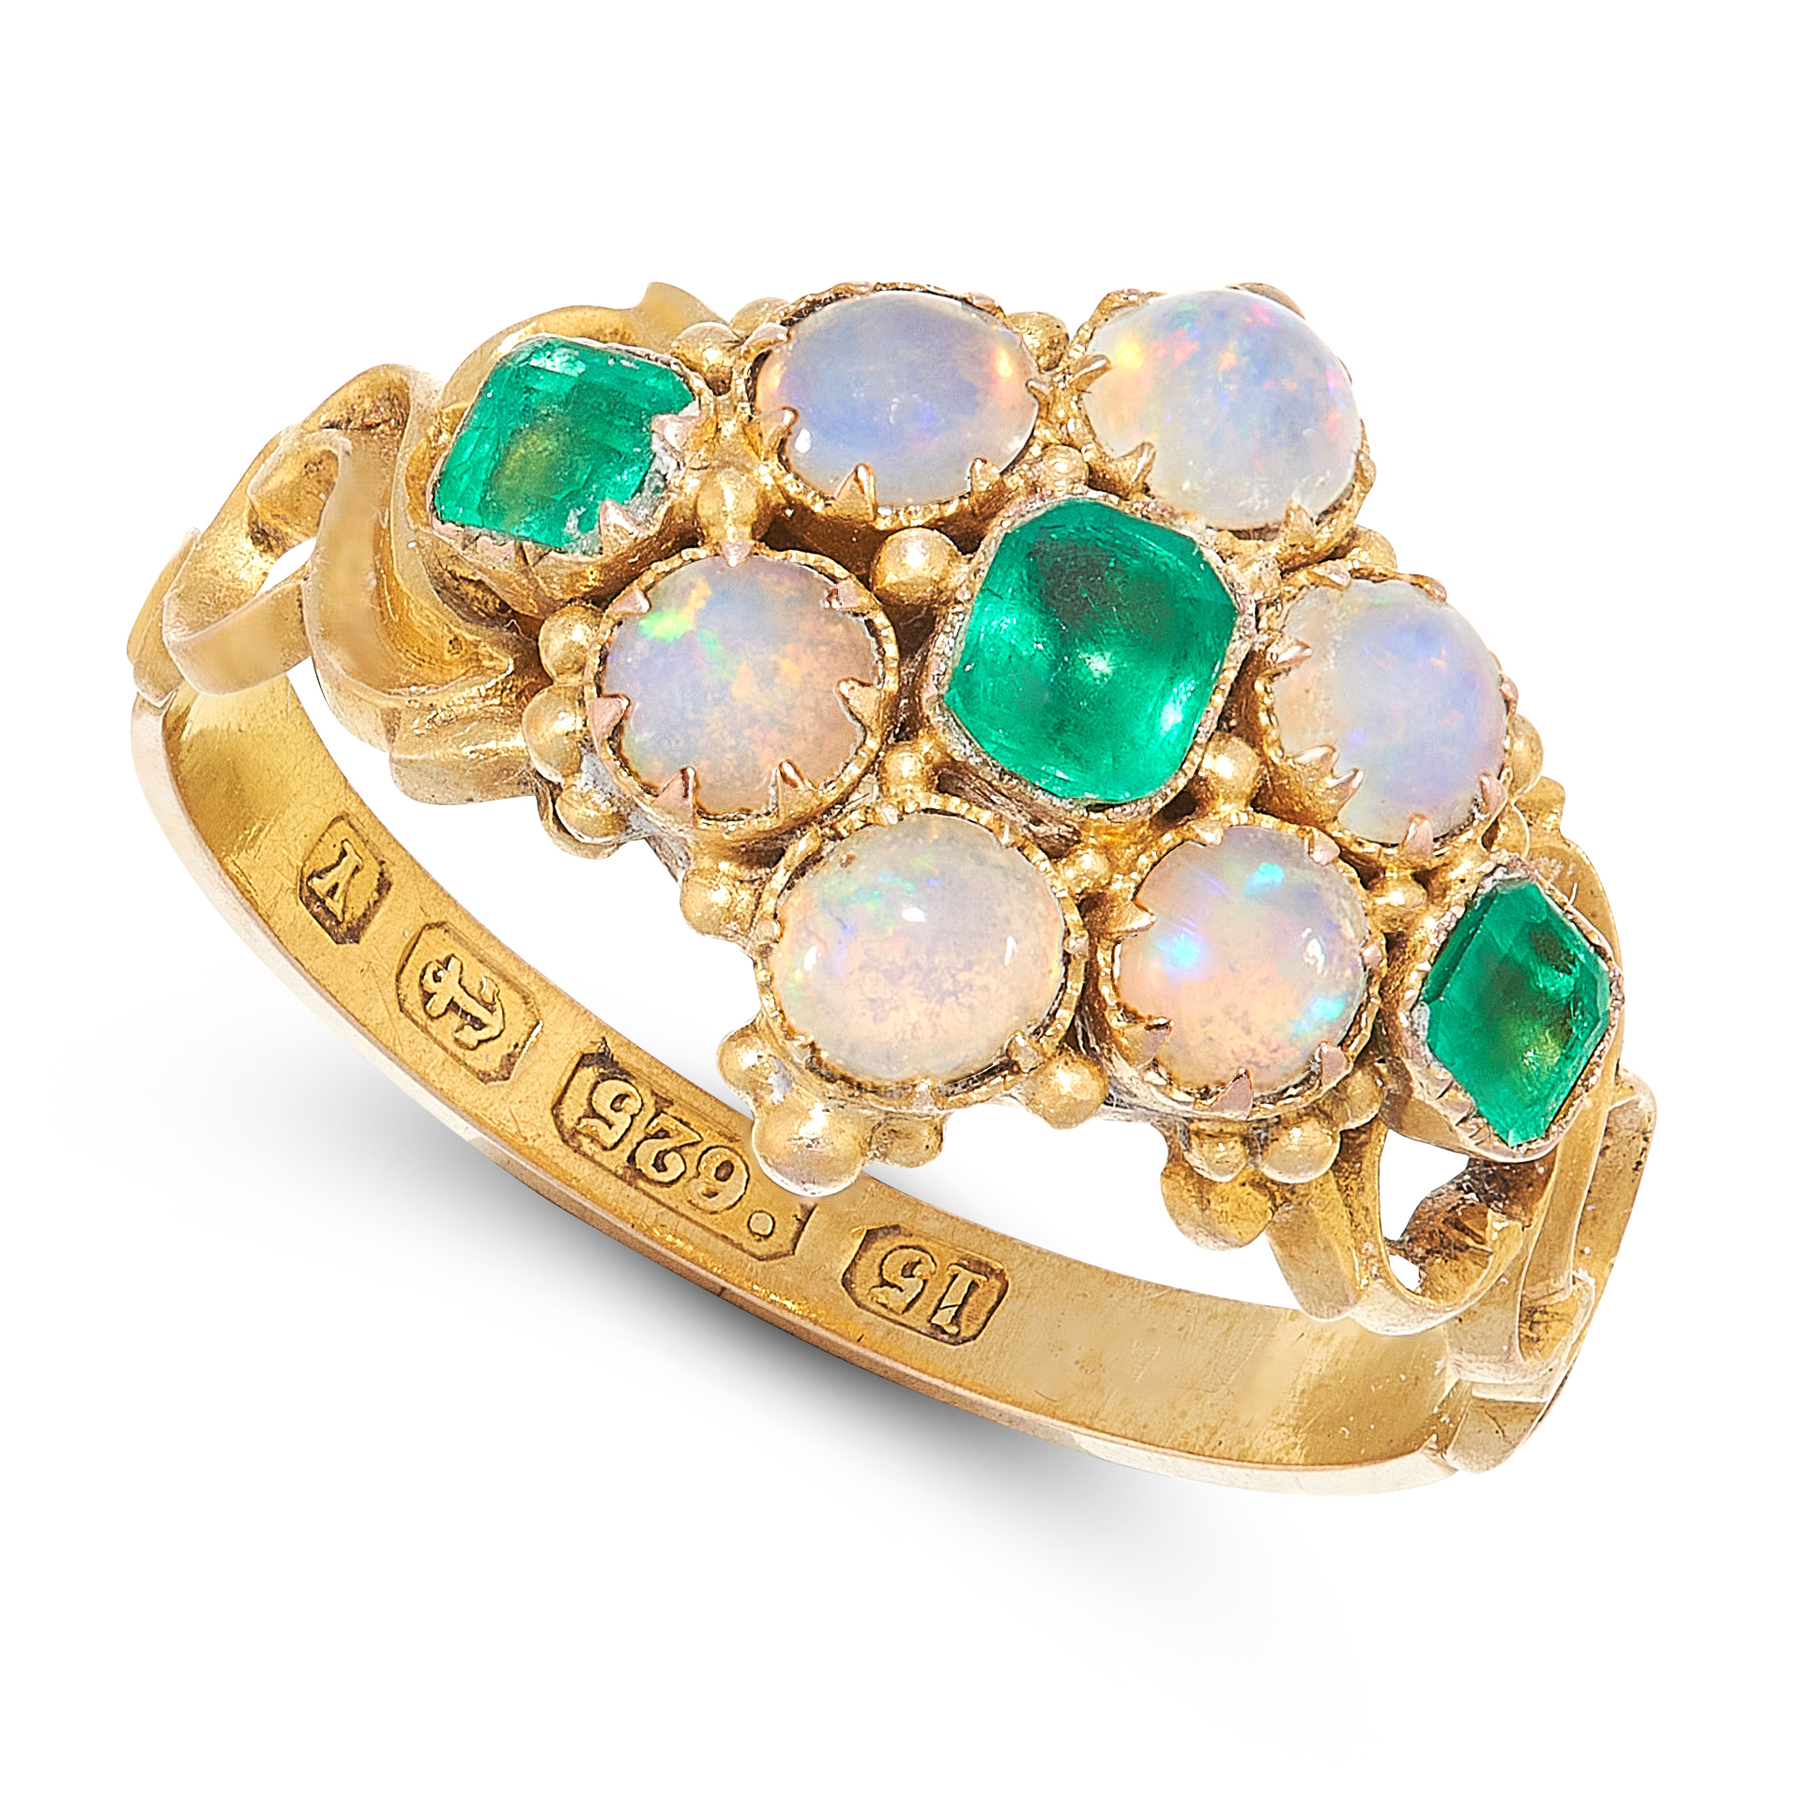 AN ANTIQUE VICTORIAN EMERALD AND OPAL RING, 1873 in 15ct yellow gold, the central flower motif set